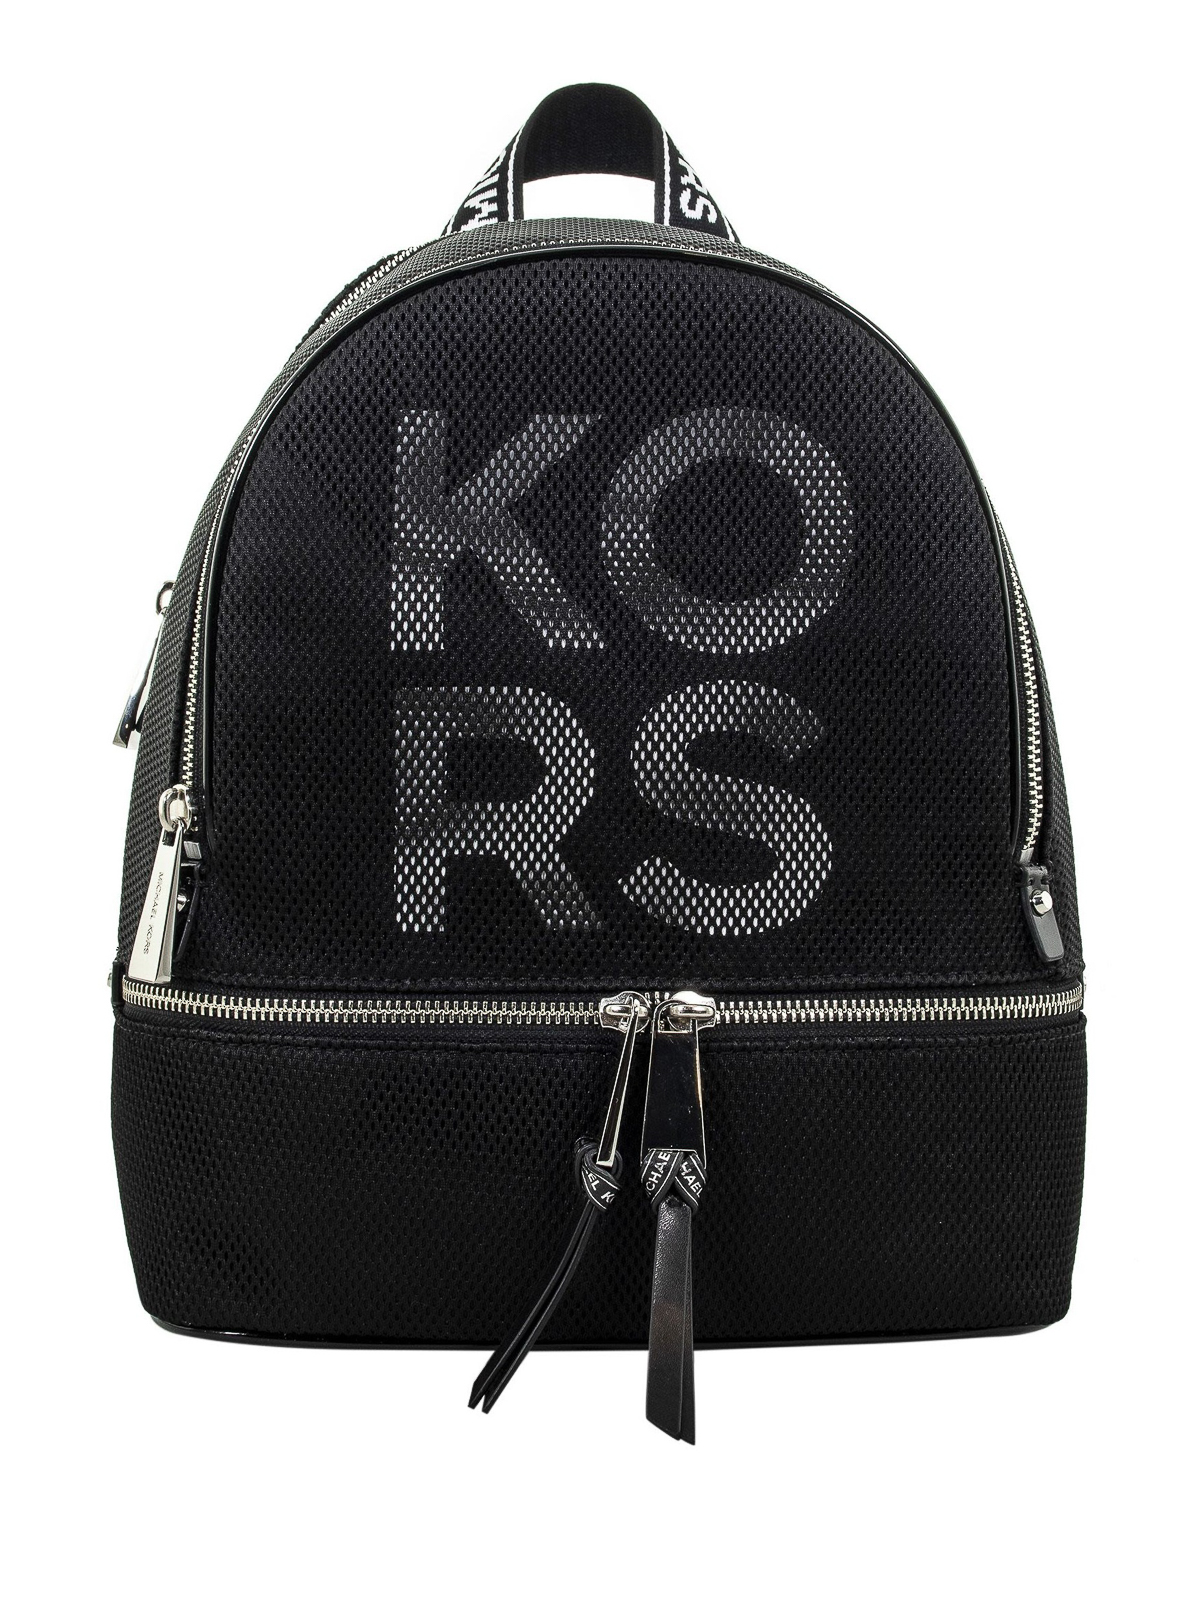 MK Michael kors womens printed backpack medium size printed PVC material  wearresistant and durable  Shopee Malaysia